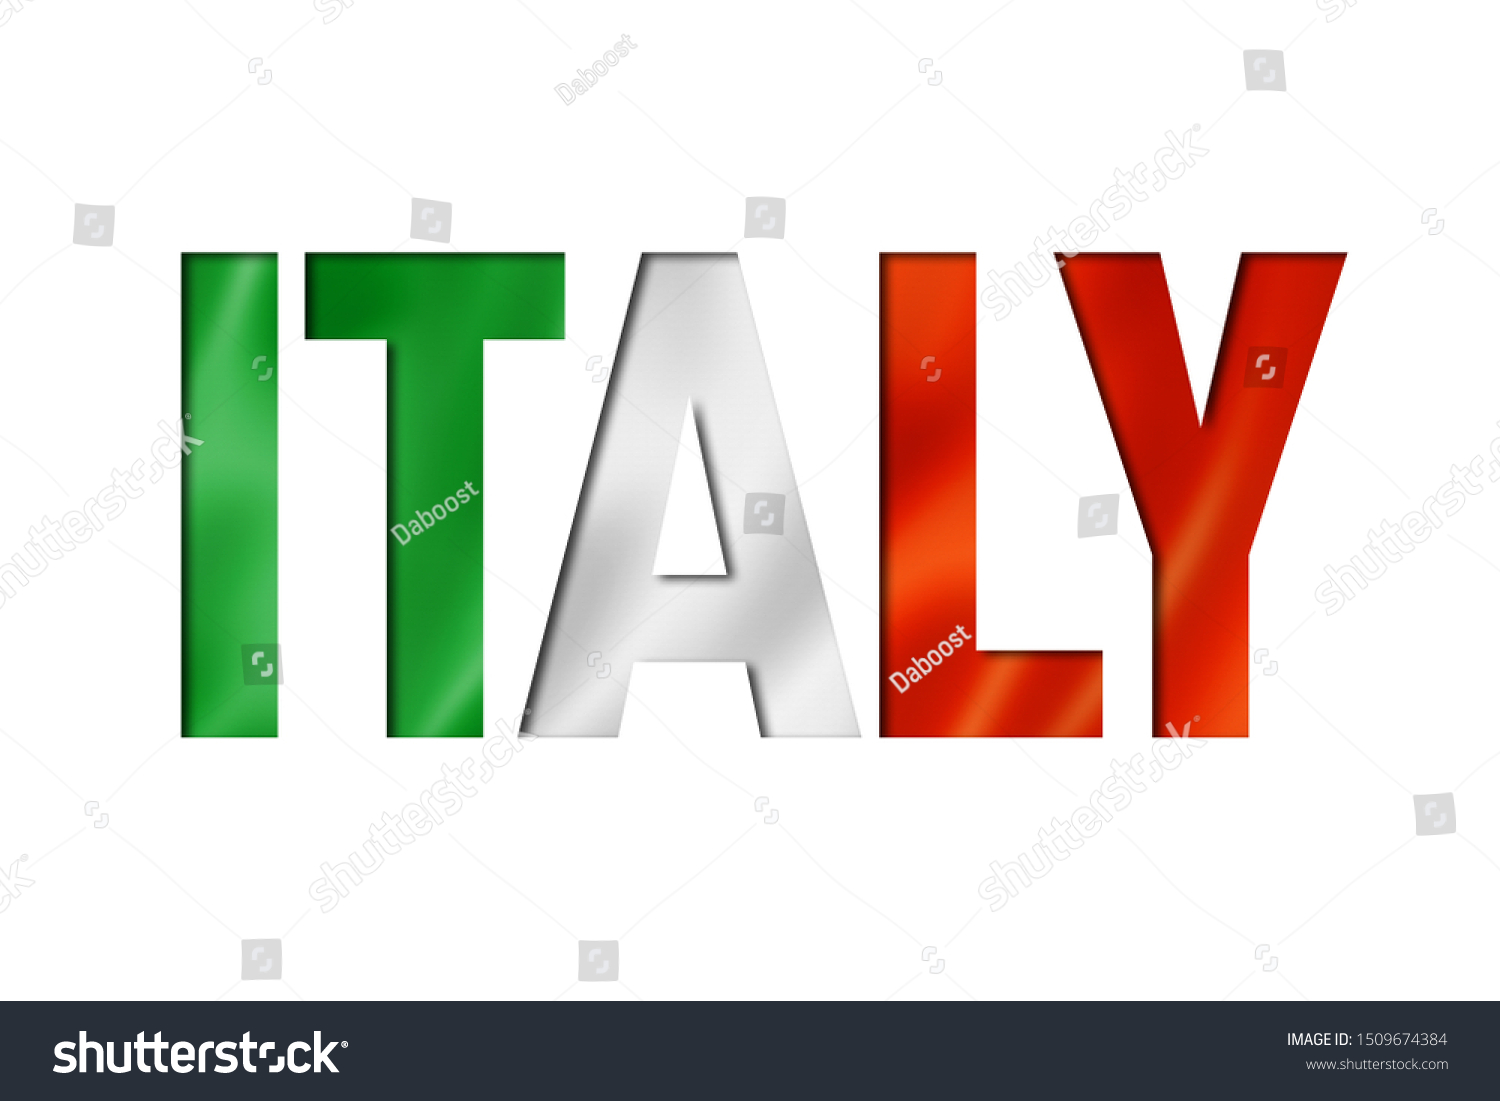 15,290 Word italy Images, Stock Photos & Vectors | Shutterstock